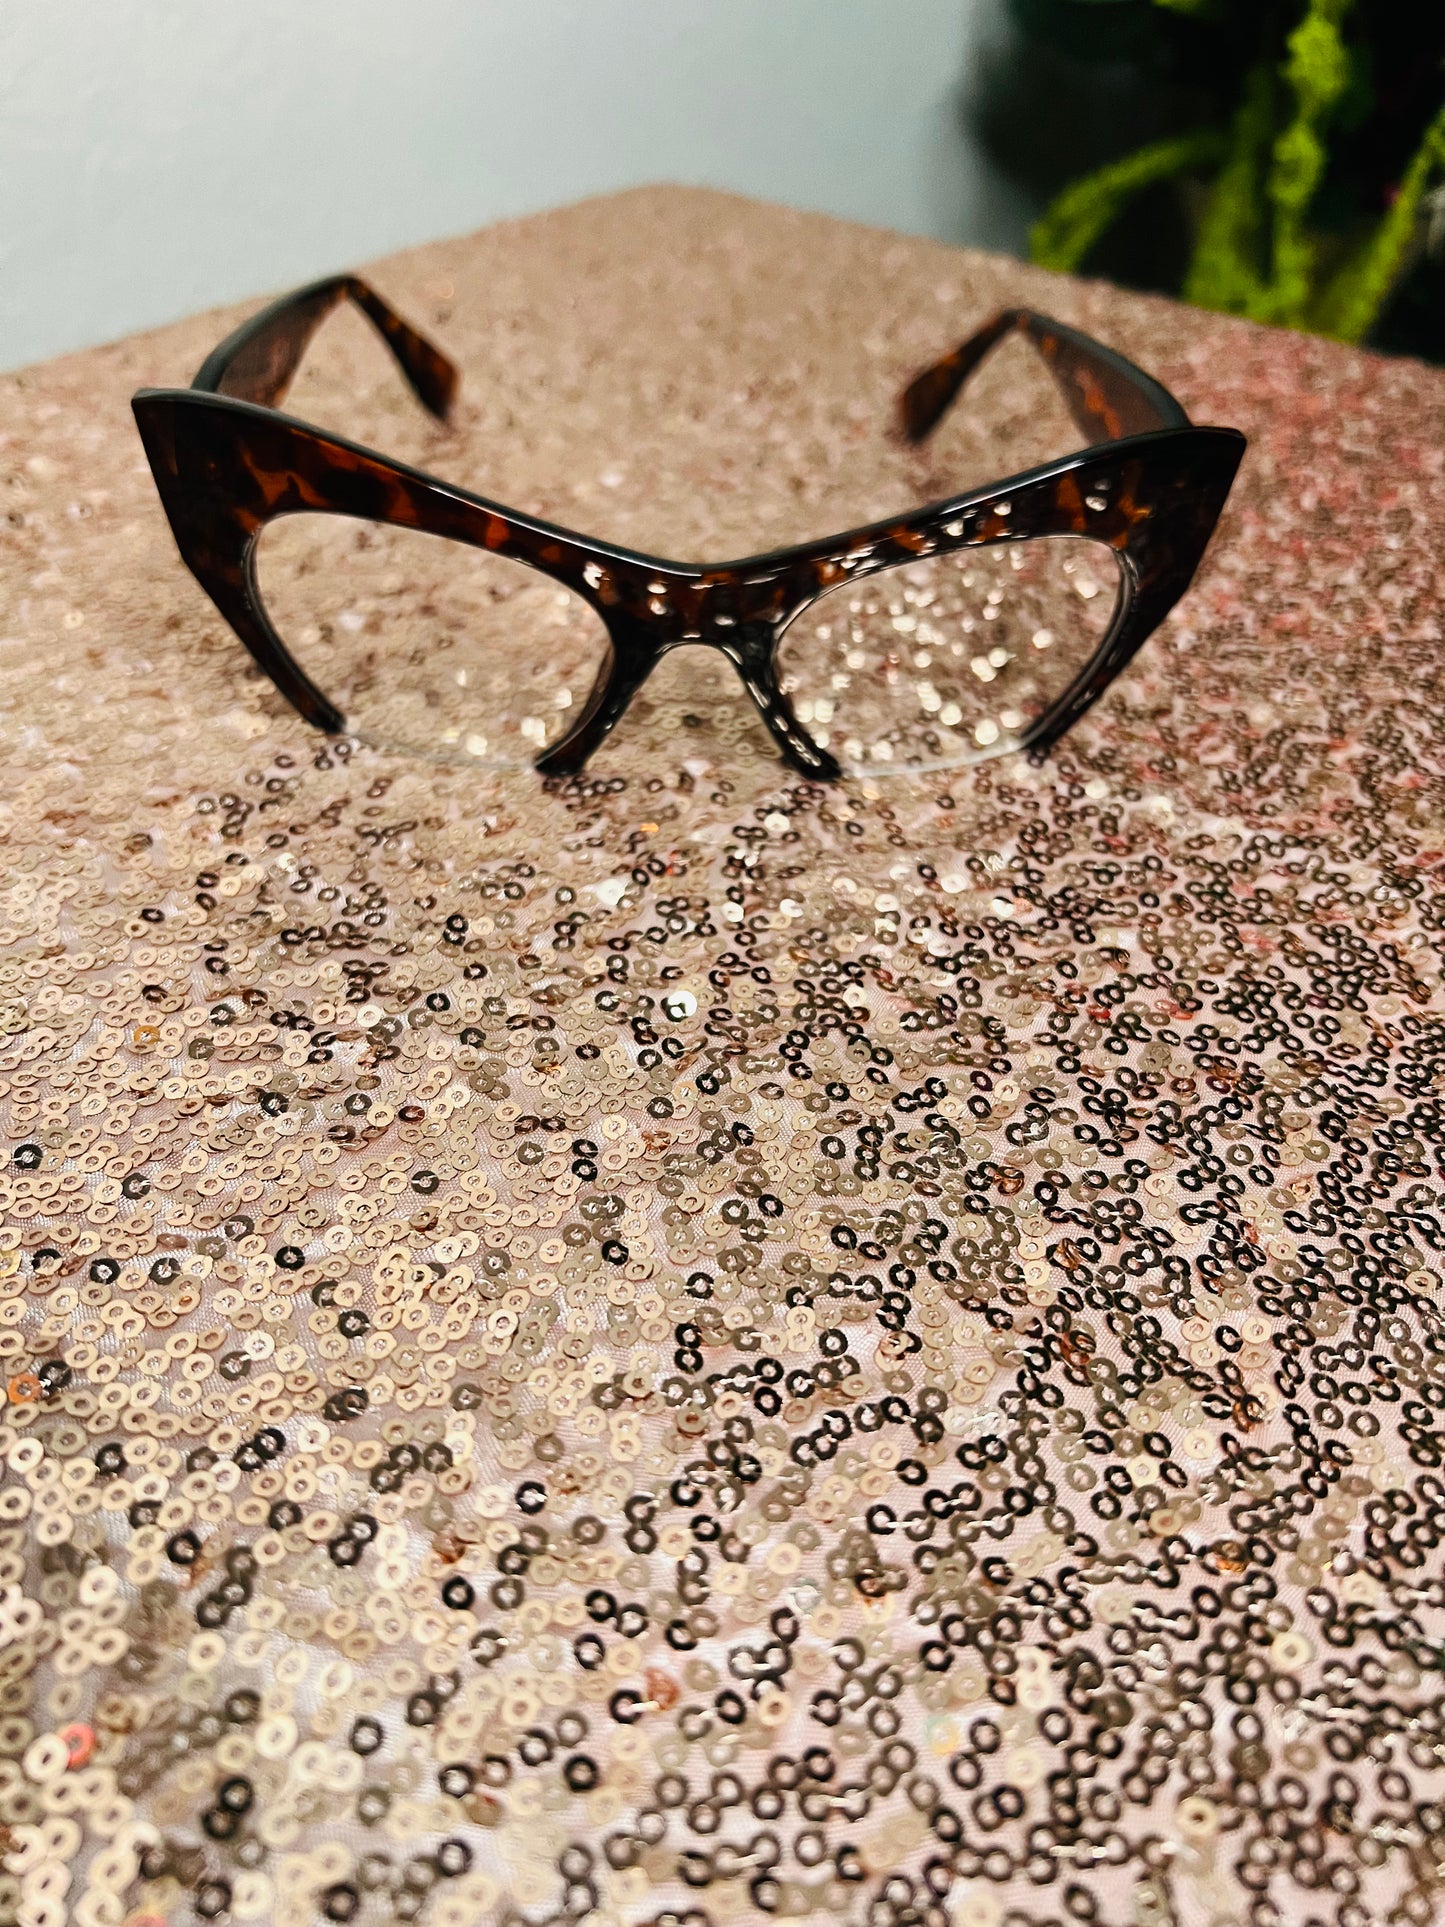 Leopard cat eyed clear glasses